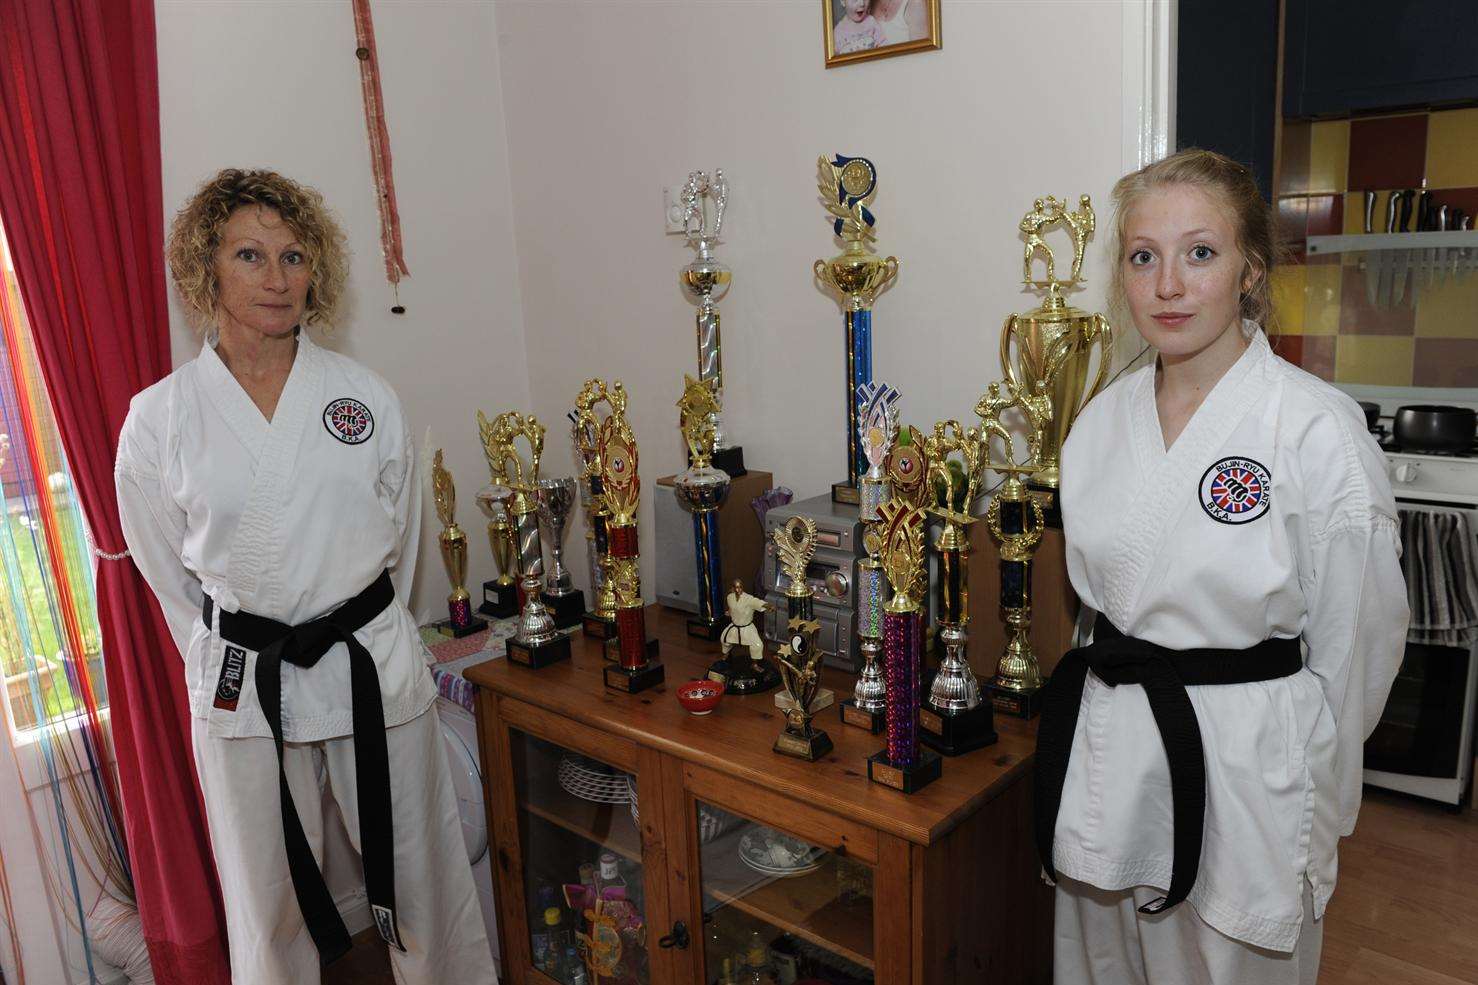 Kara and Megan proudly display their trophies and black belts